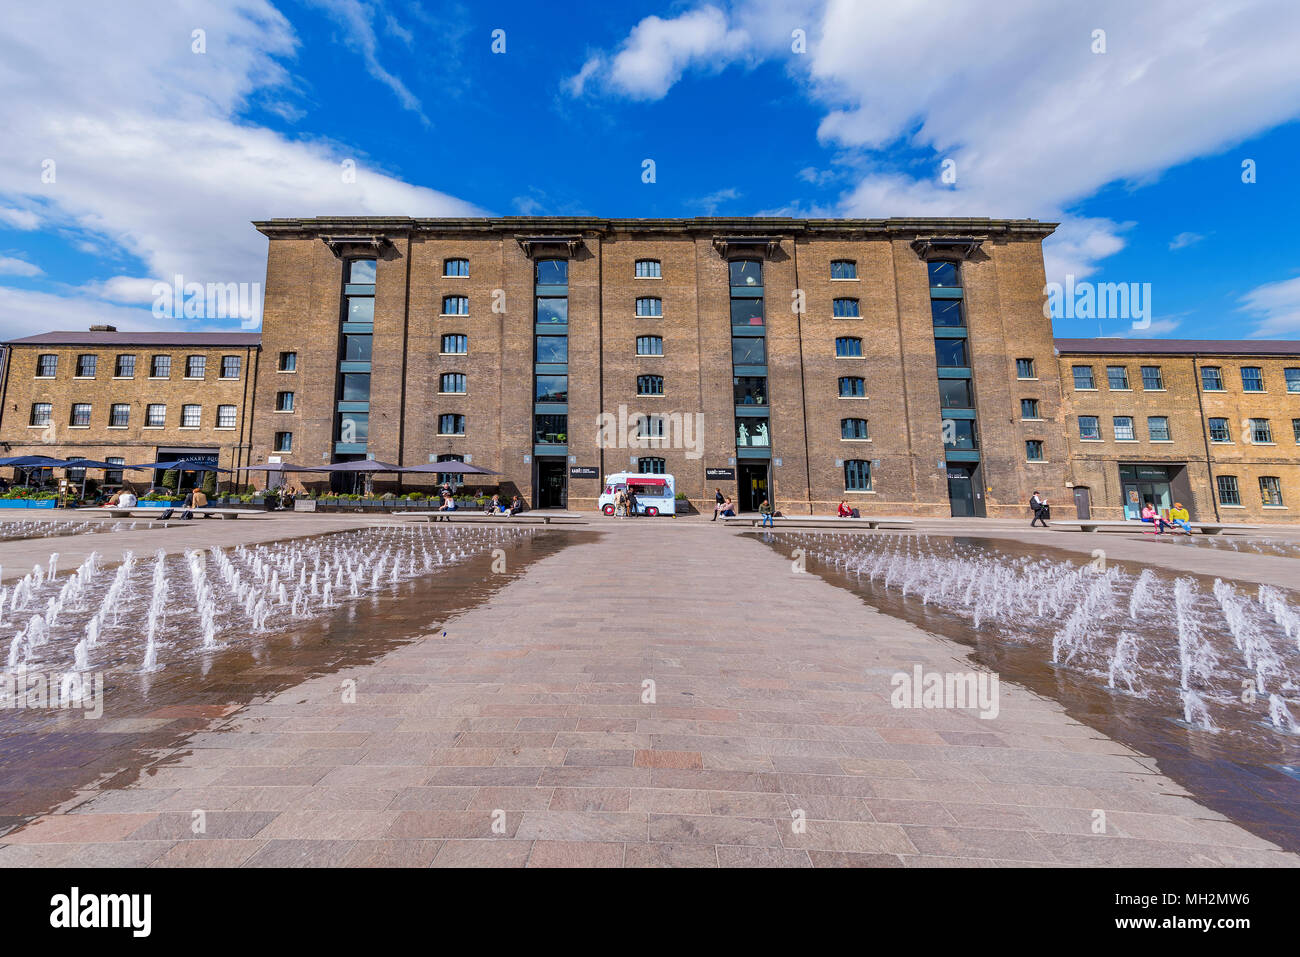 LONDON, UNITED KINGDOM - APRIL 17: This is a view of Central Saint Martins university, a famous Arts university in the Kings Cross area on April 17, 2 Stock Photo